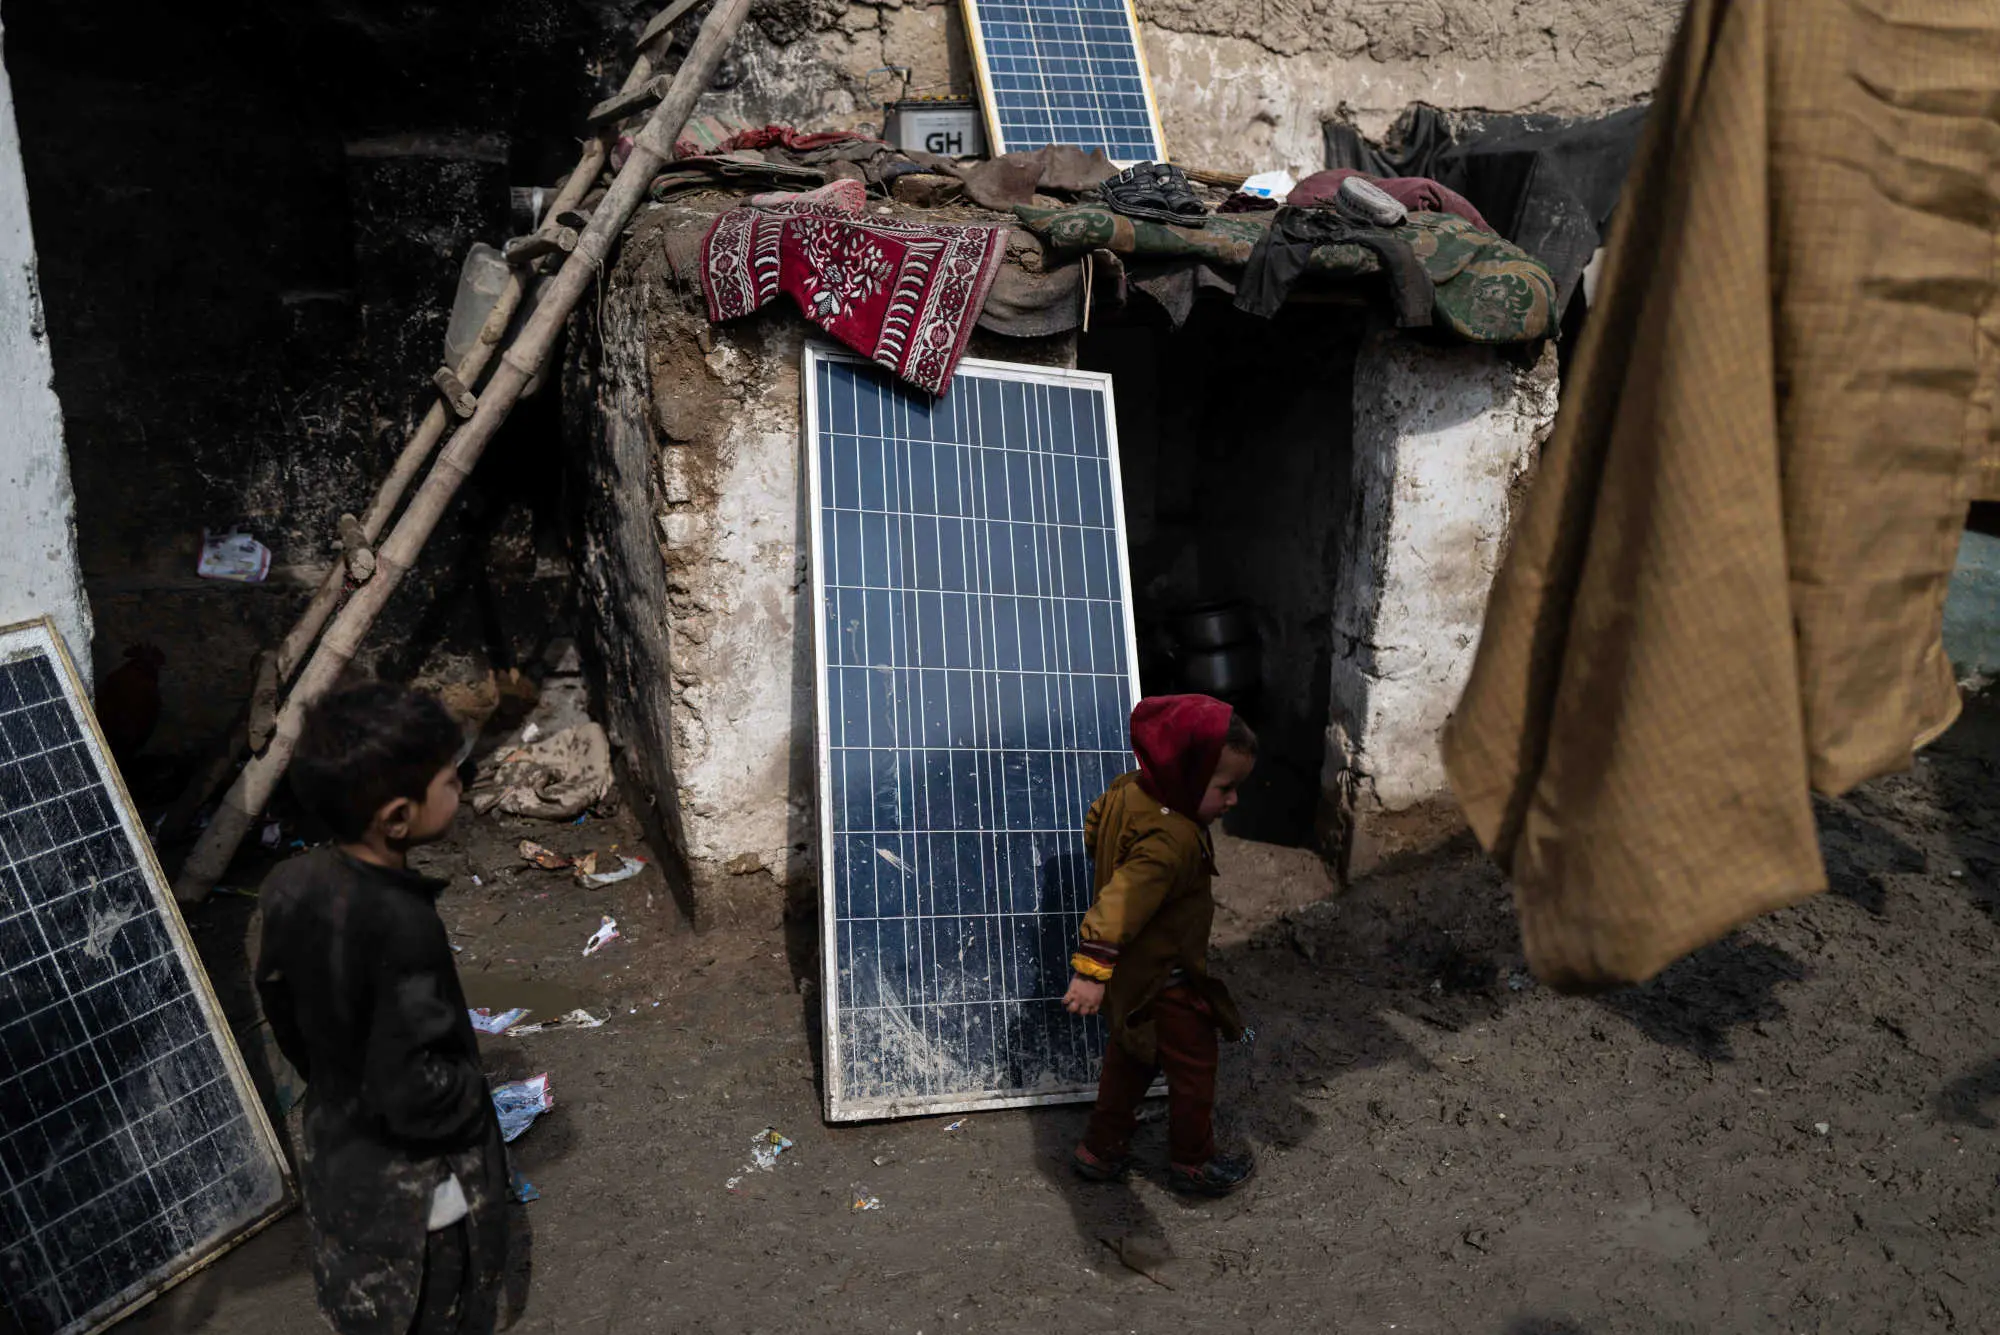 A young boy runs by the solar power panels